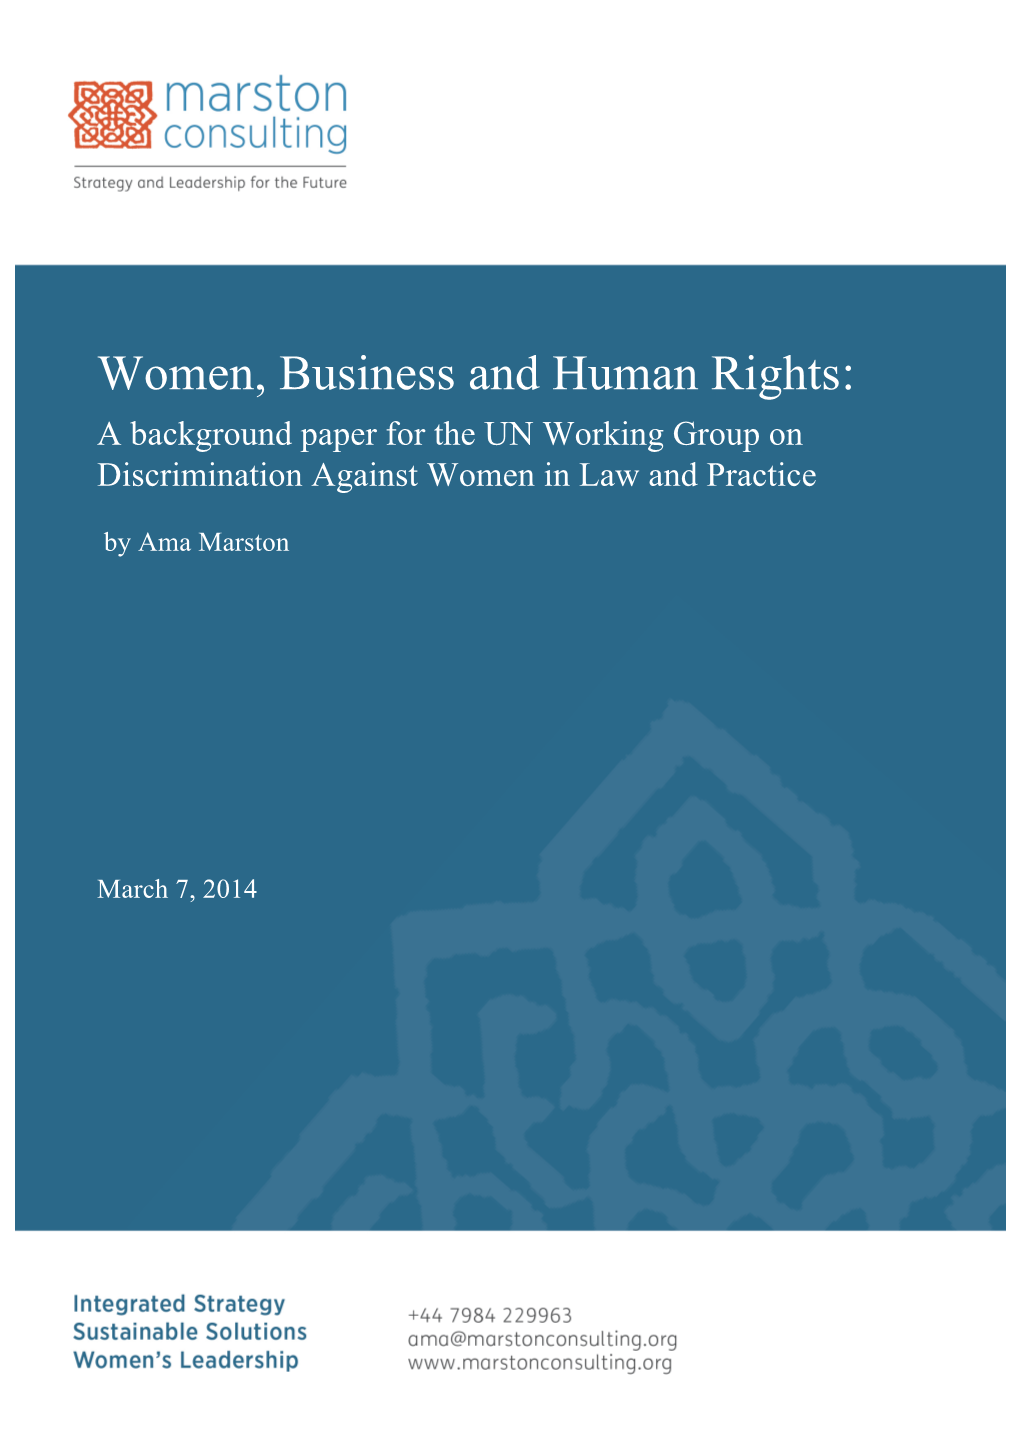 Women, Business and Human Rights: a Background Paper for the UN Working Group on Discrimination Against Women in Law and Practice